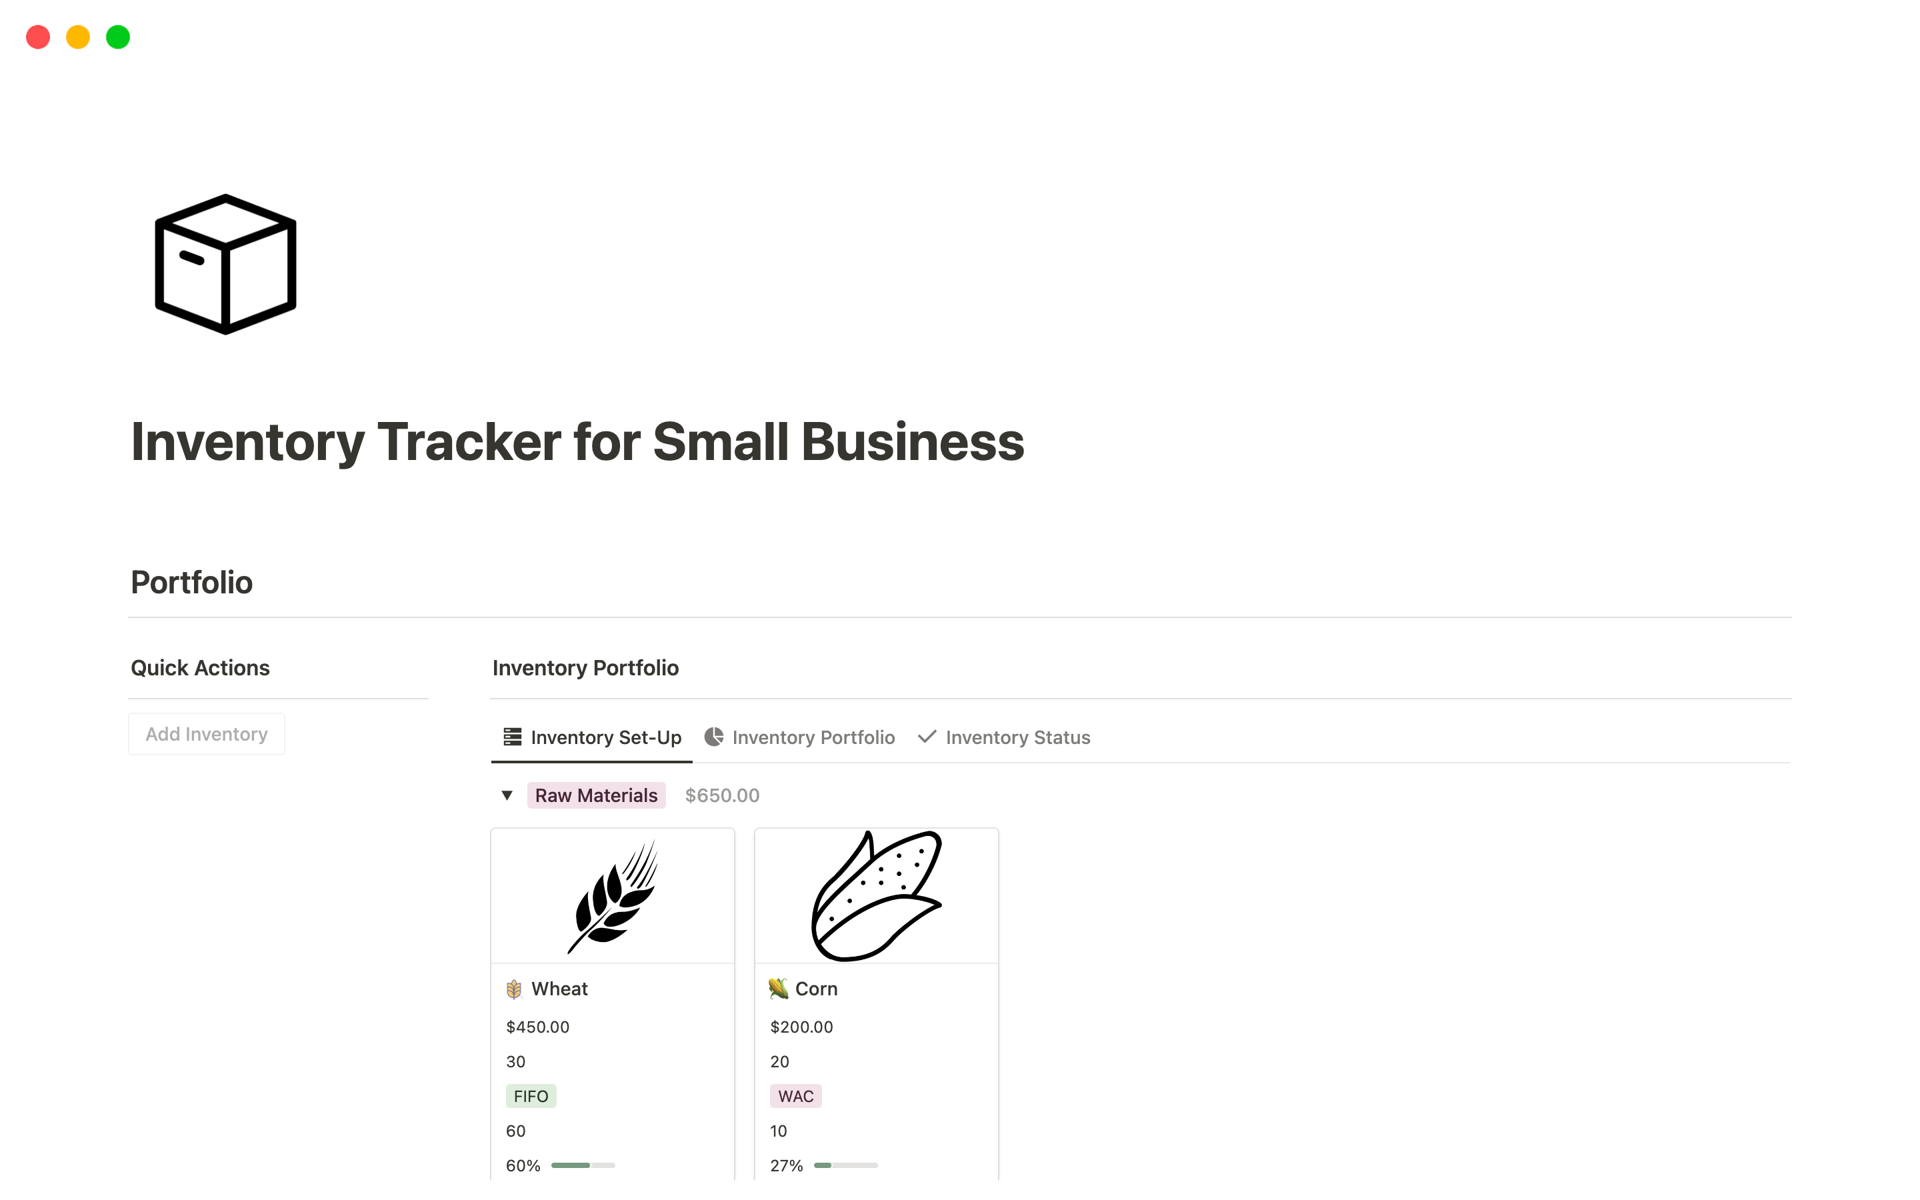 Only tool you need to manage your inventory for small business effectively in a one-glance view.